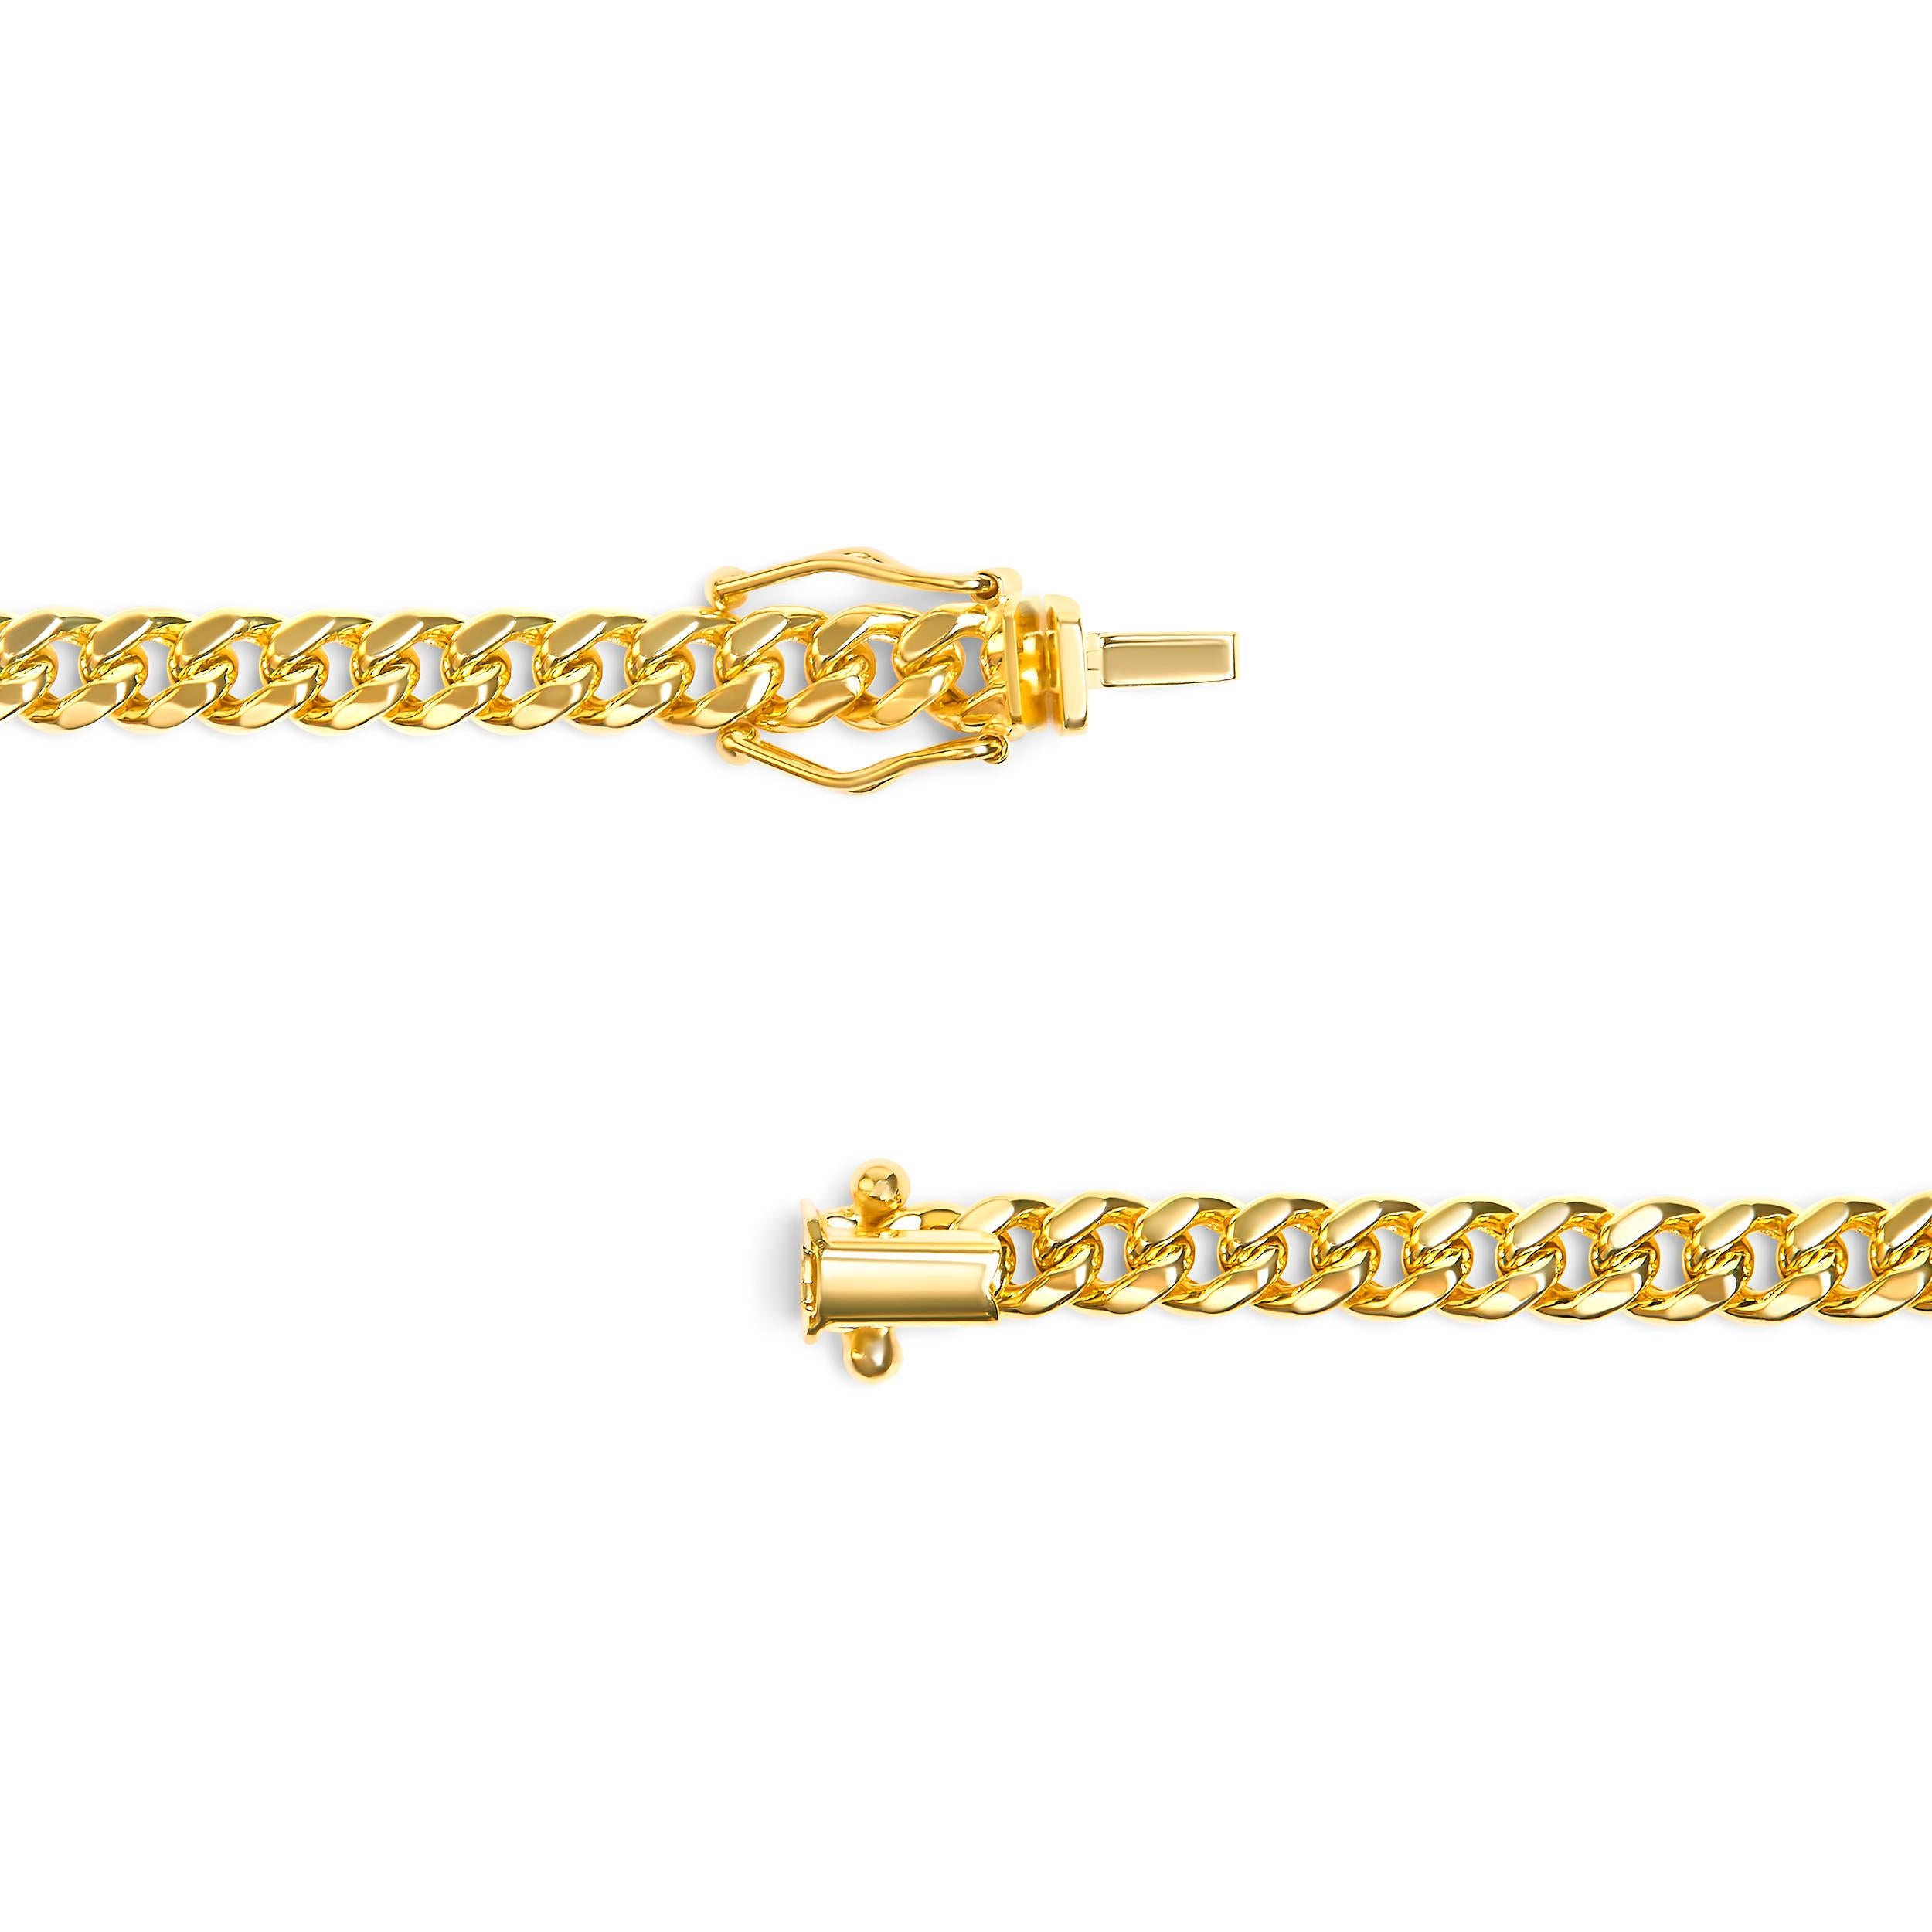 Introducing a captivating masterpiece, this Semi-Solid 14K Yellow Gold 4.5mm Miami Cuban Chain Necklace is an exquisite fusion of elegance and strength. Crafted with meticulous precision, this unisex chain boasts a generous 22-inch length, perfectly